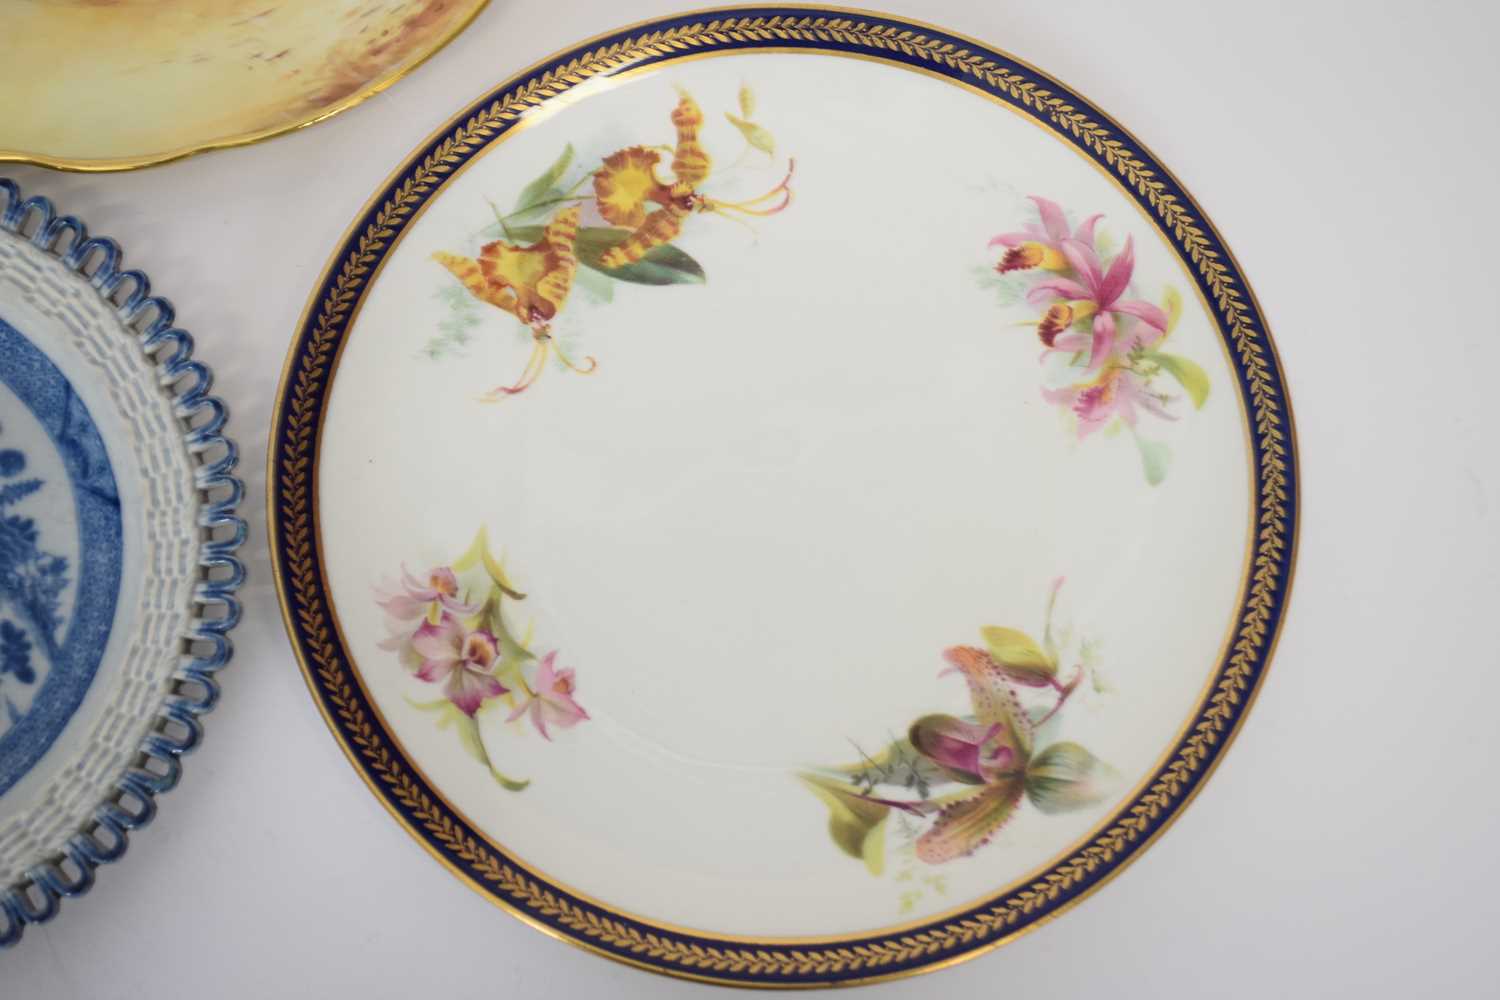 Small pearlware plate with pierced border, possibly Davenport, together with a George Jones plate, - Image 4 of 4